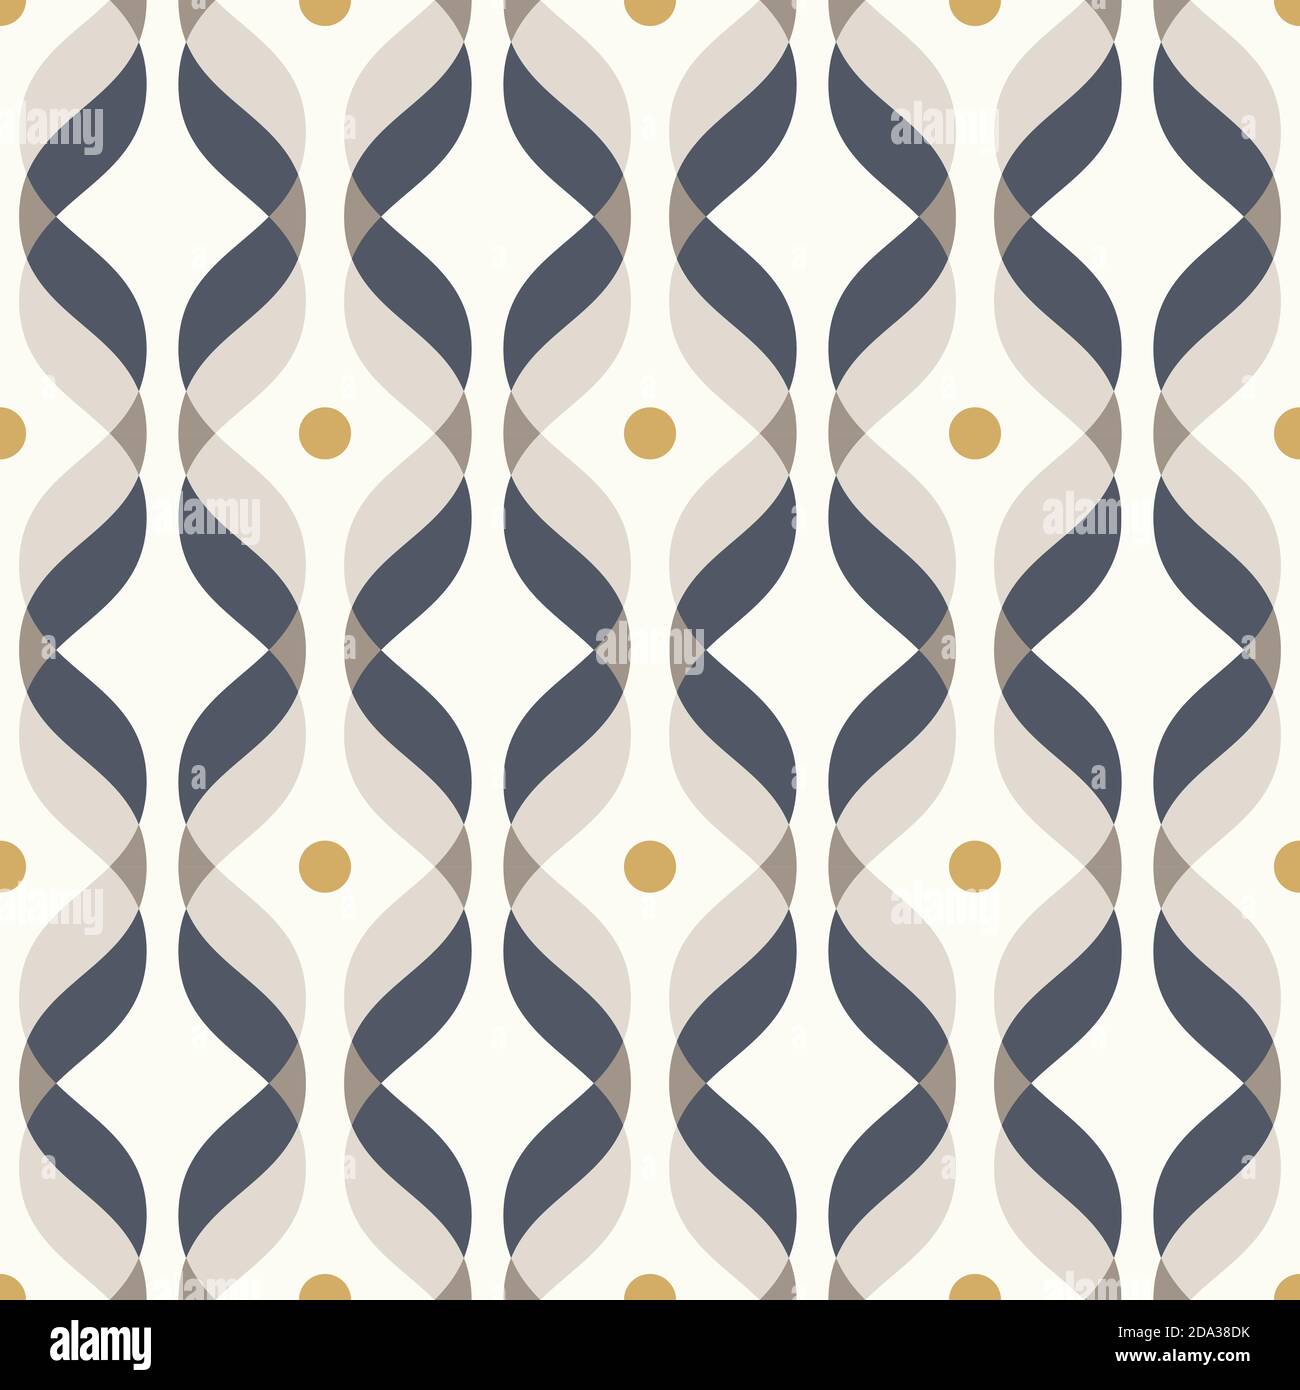 Ogee Seamless Vector Curved Pattern Abstract Geometric Background